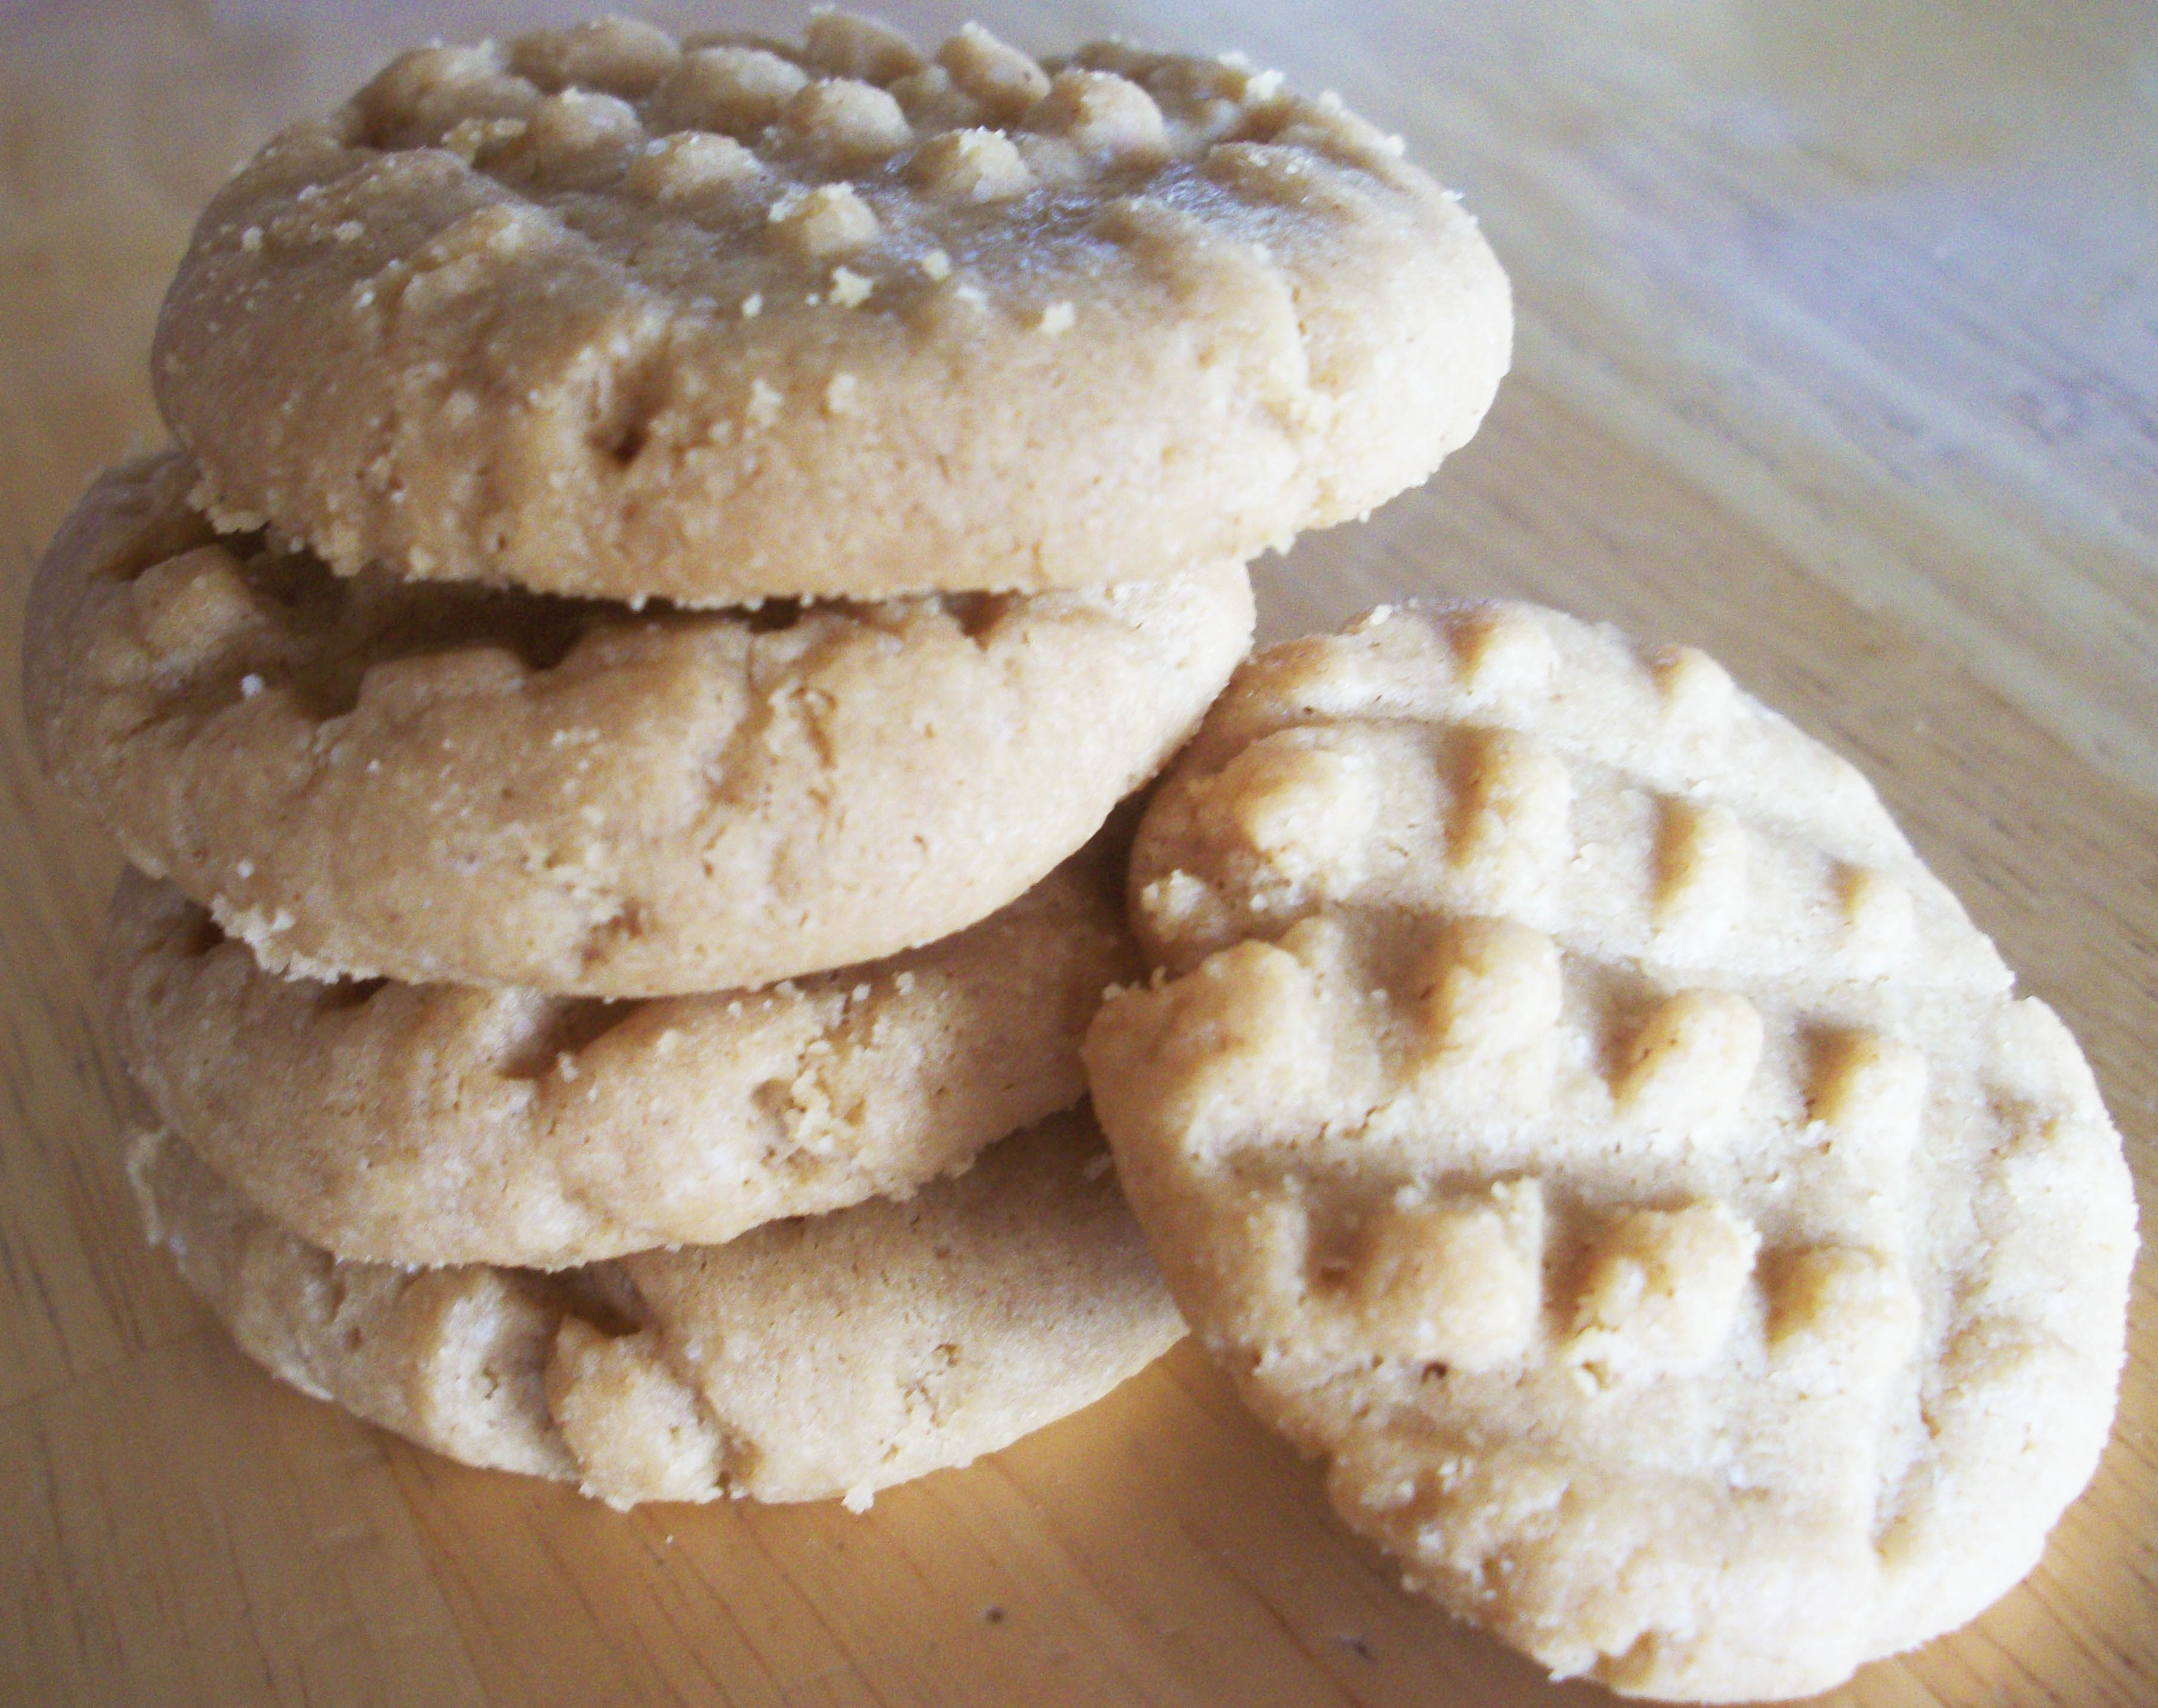 Impossible Peanut Butter Cookies